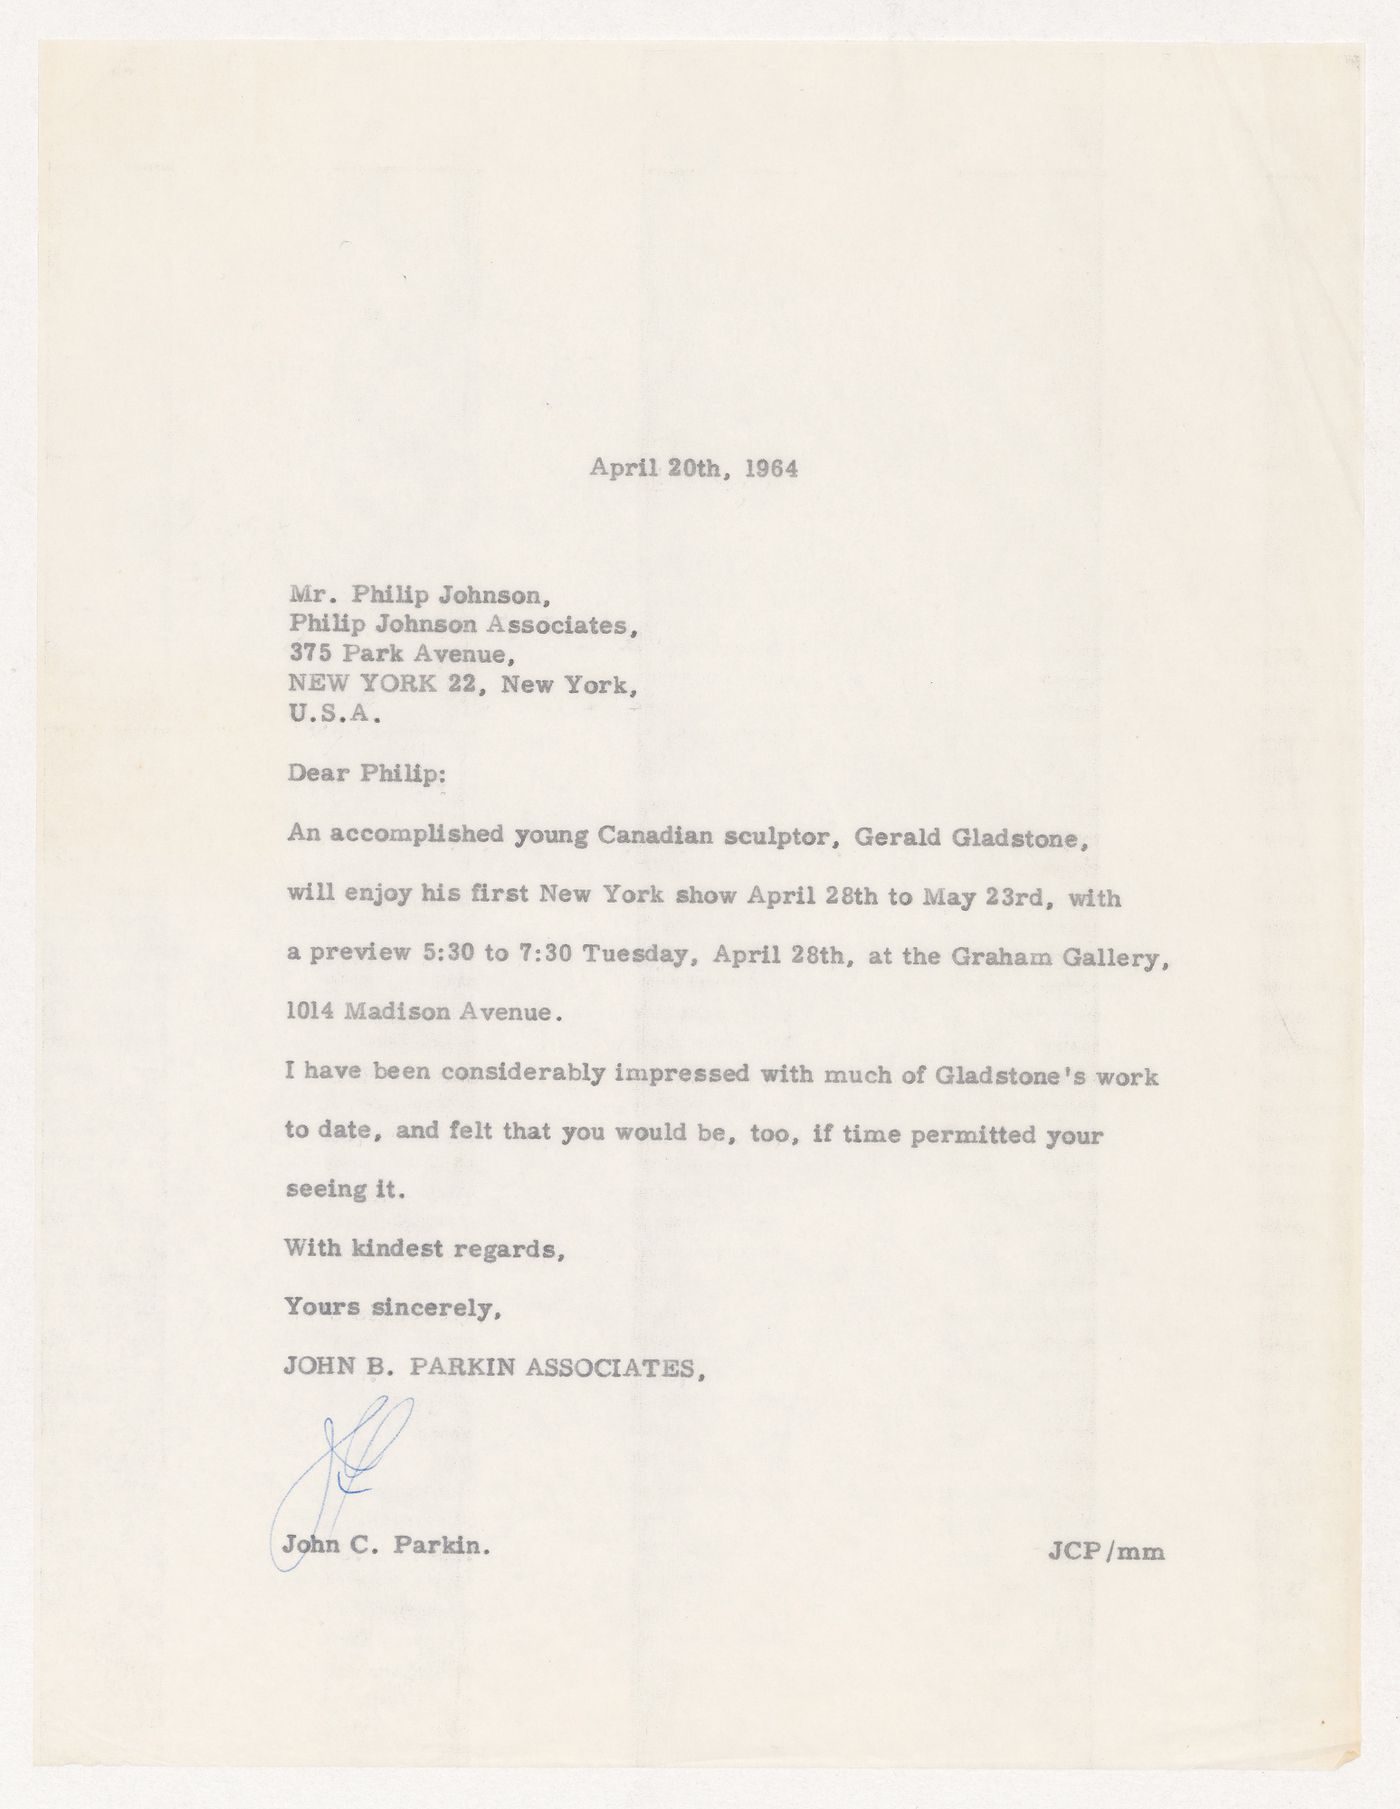 Letter from John C. Parkin to Philip Johnson on Gerald Gladstone exhibit in New York